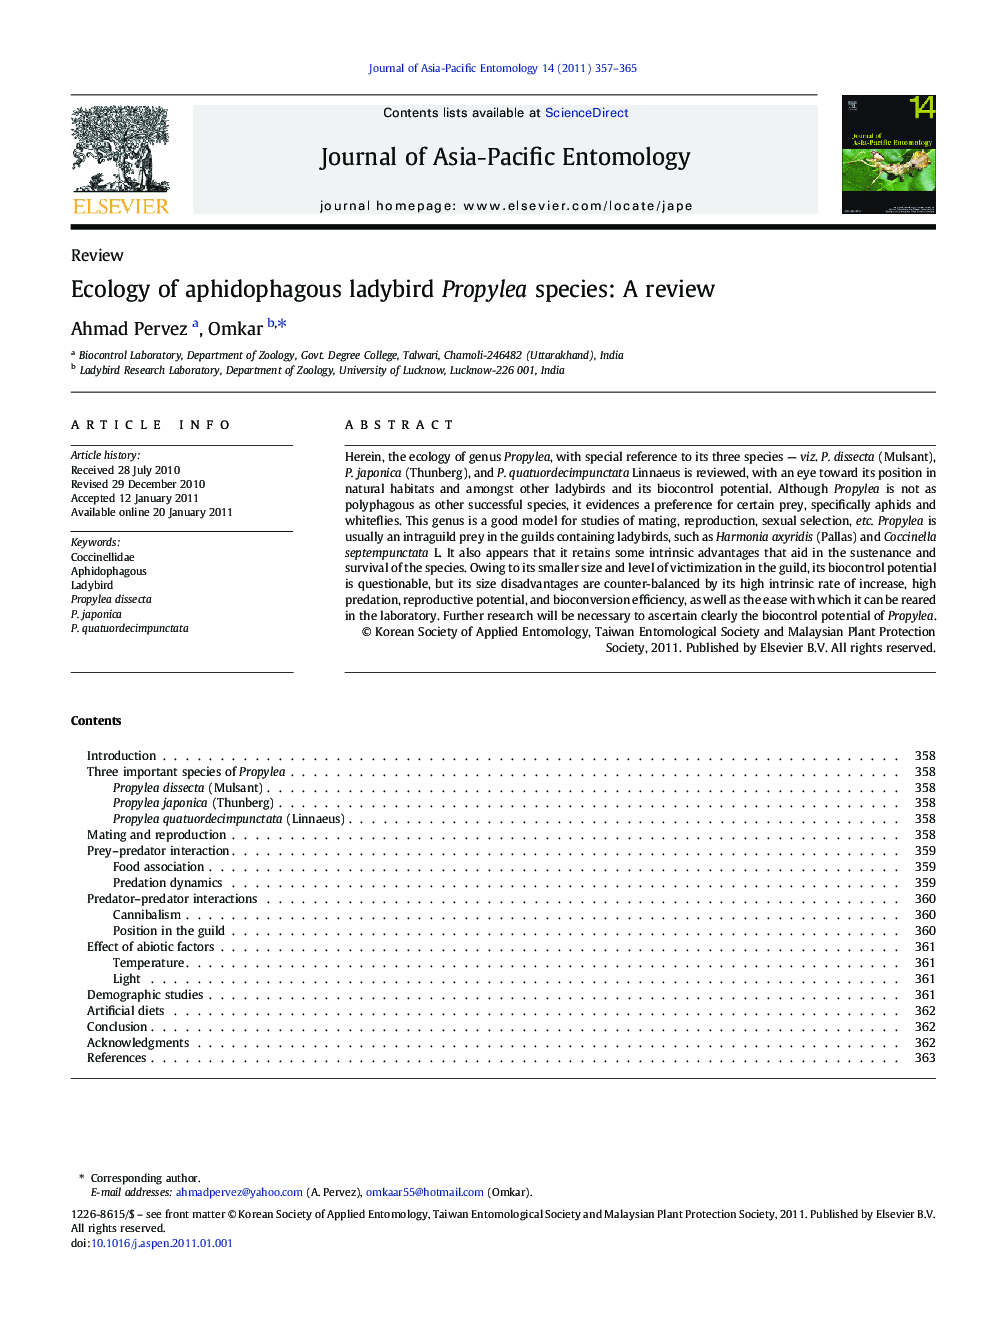 Ecology of aphidophagous ladybird Propylea species: A review